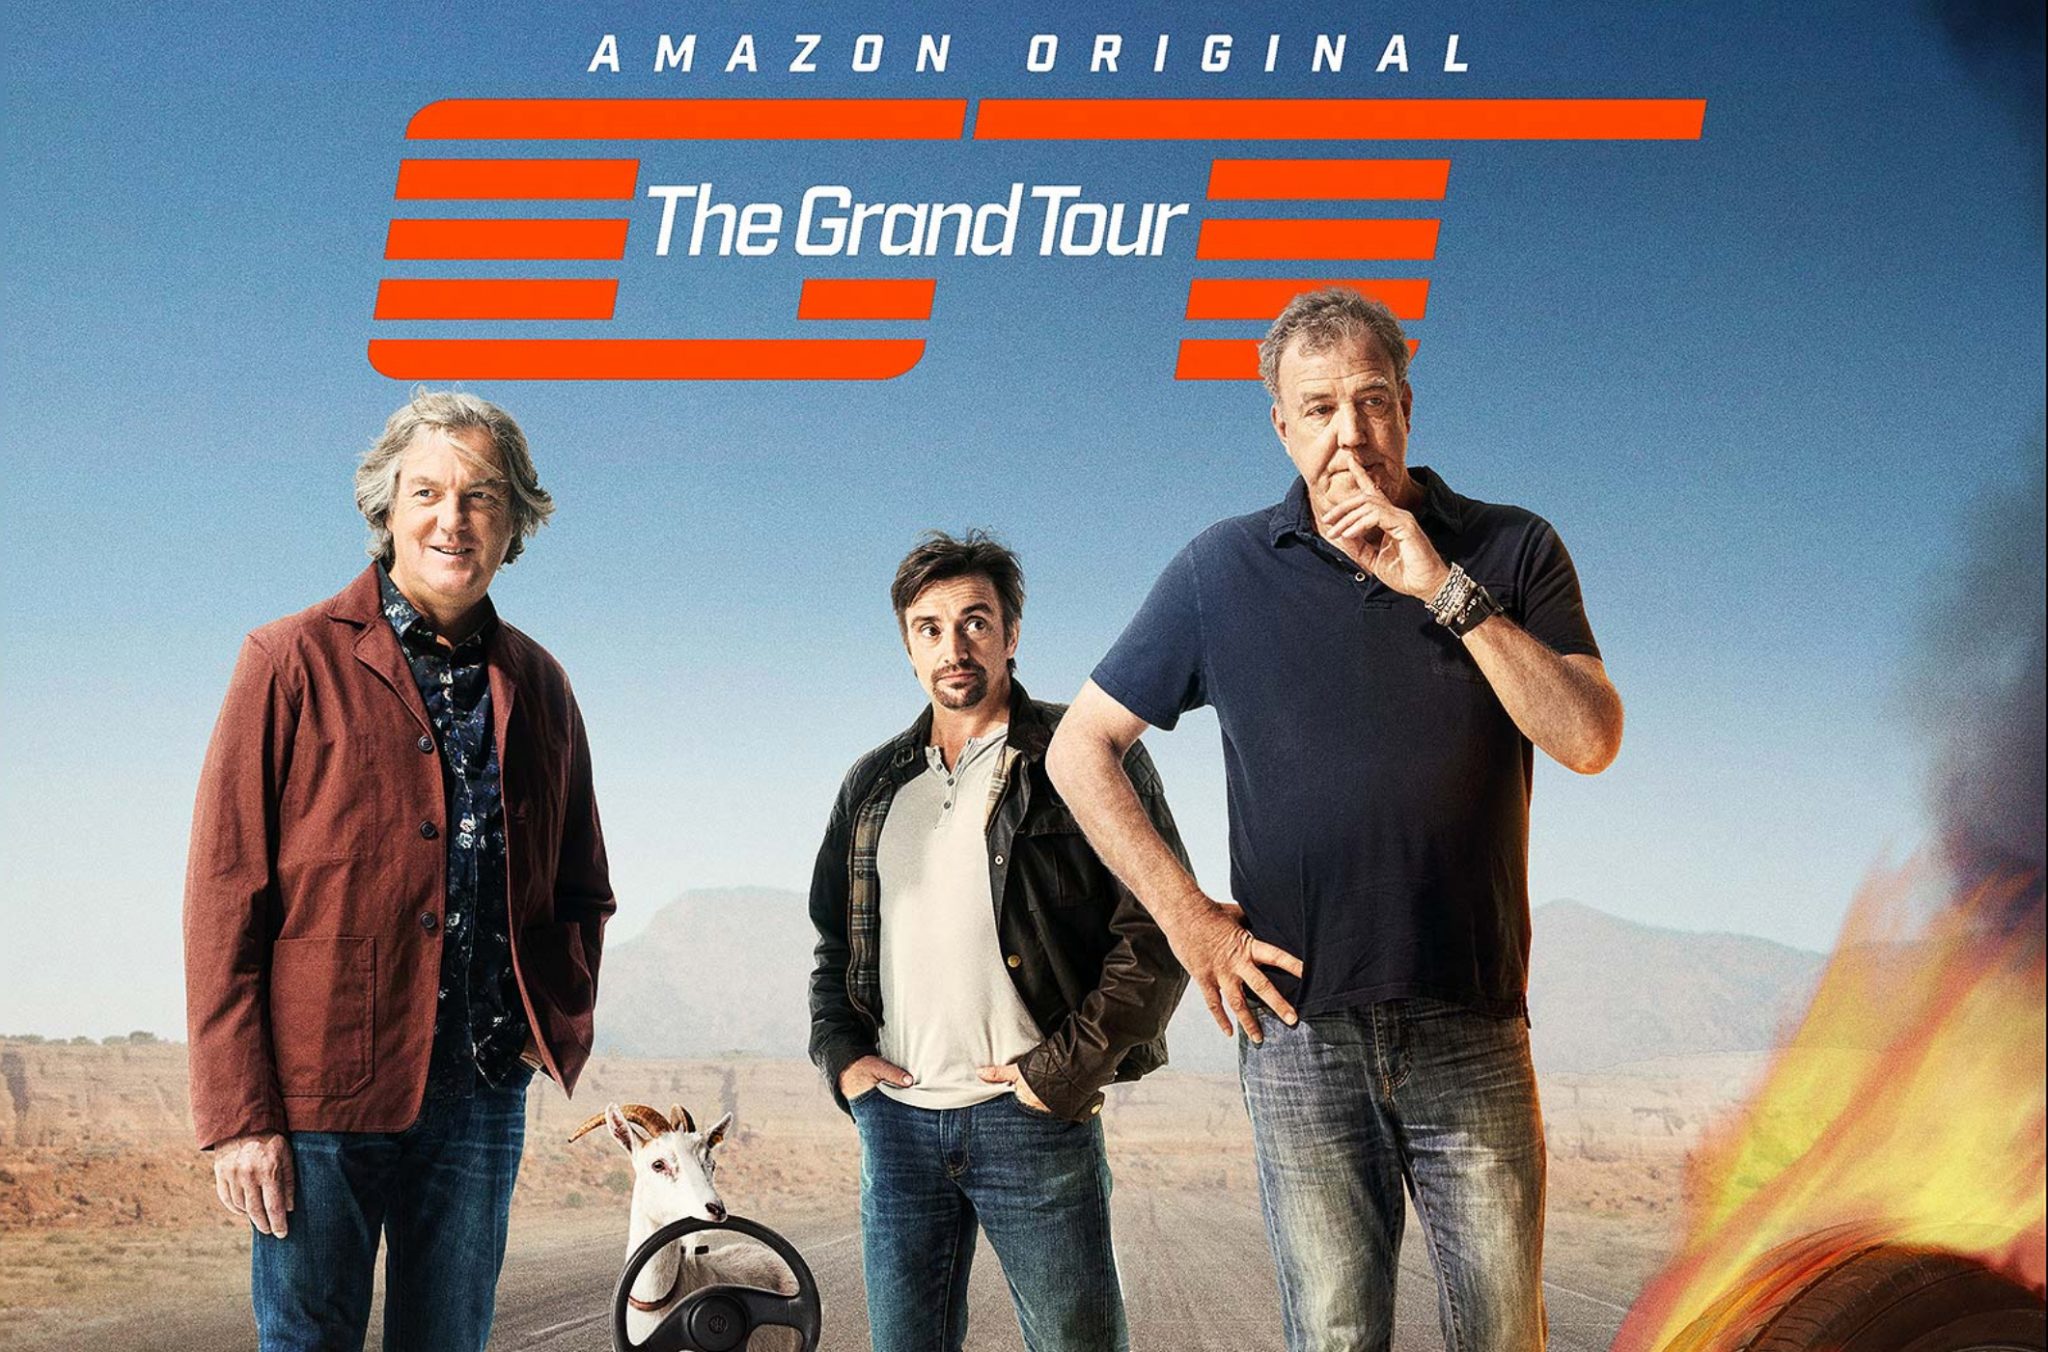 The Grand Tour is Amazon's biggest hit